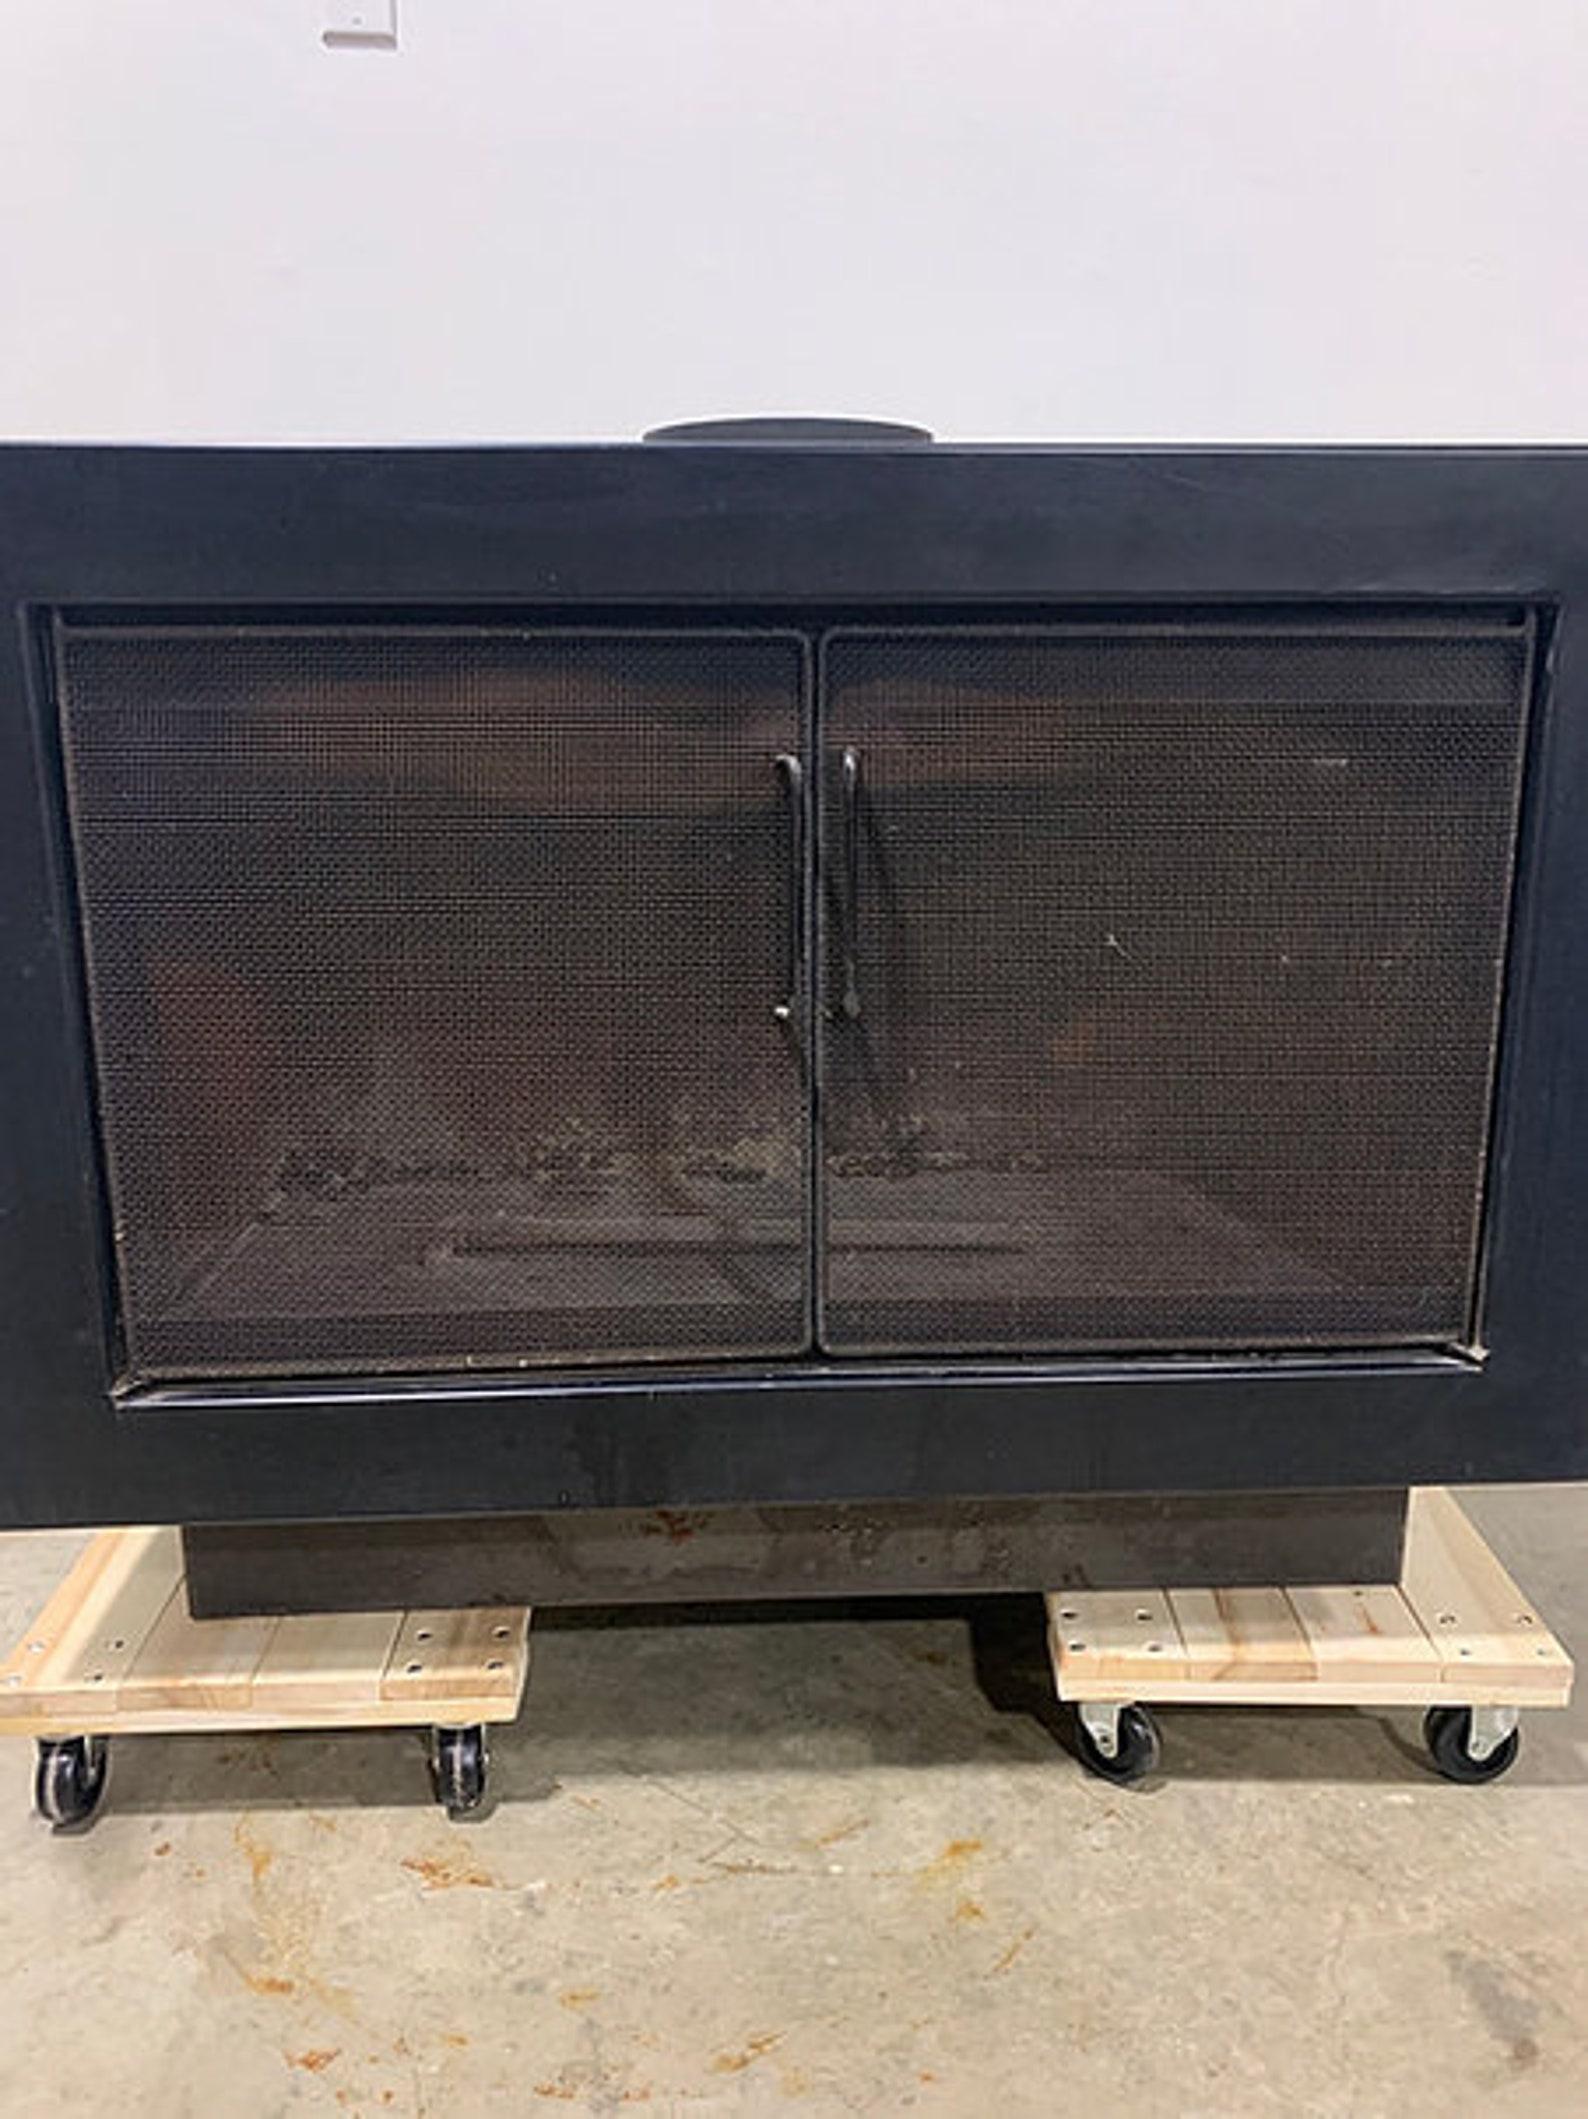 Make a big impression with this large but minimalist vintage mid-century modern fireplace. this is the Manchester Pierce model (MPX 103) that was a high-end option in the early 70s. It features twin-wall construction, optional gas hookup, and